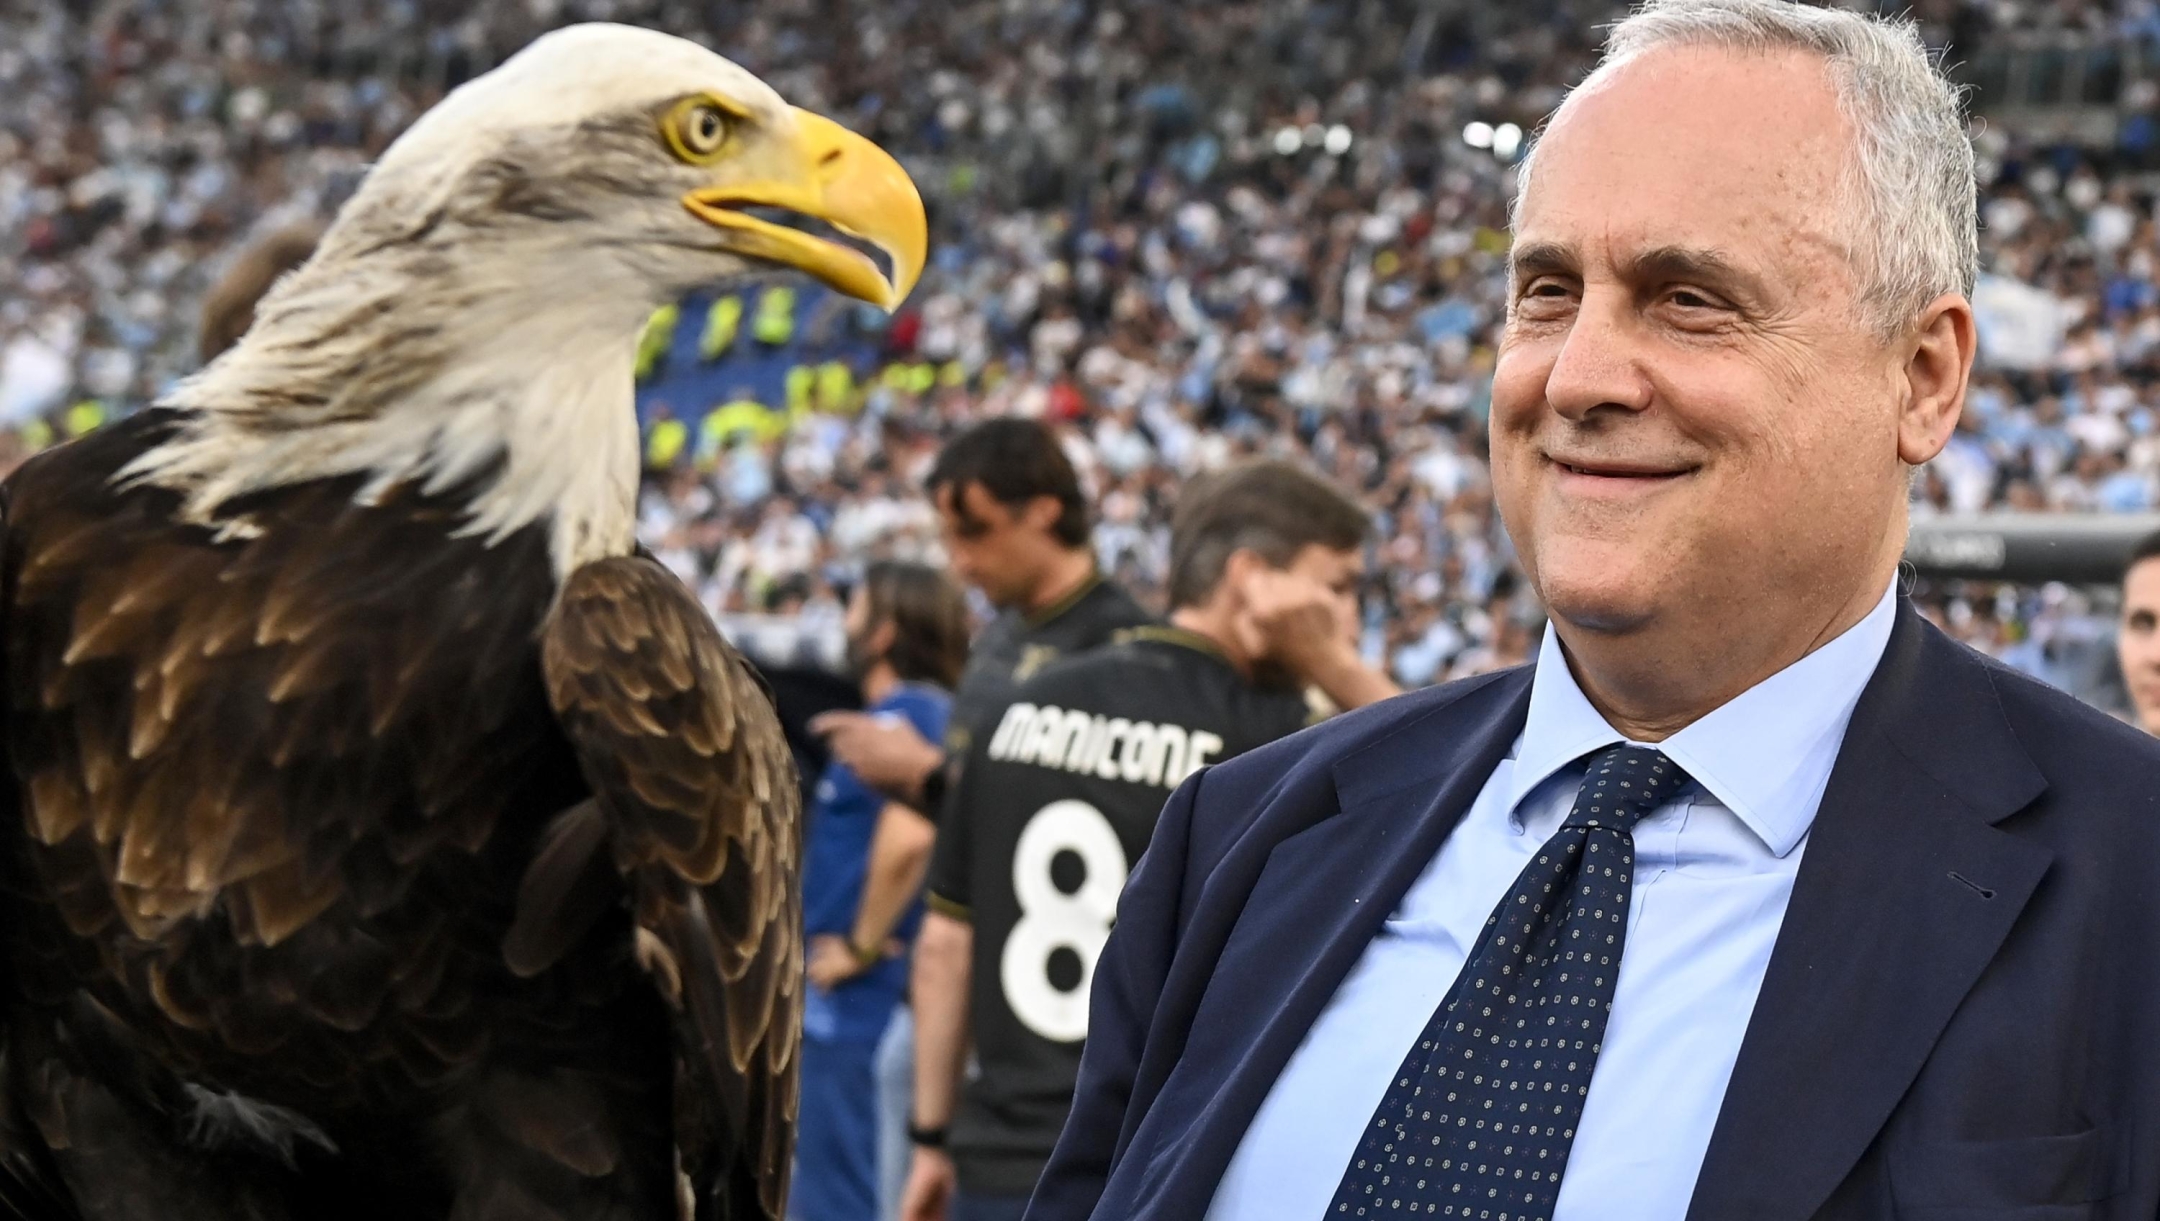 OLIMPICO STADIUM, ROME, ITALY - 2023/05/28: SS Lazio President Claudio Lotito poses with the eagle Olimpia during the celebrations of the champions league qualification at the end of the Serie A football match between SS Lazio and US Cremonese. Lazio won 3-2 over Cremonese. (Photo by Andrea Staccioli/Insidefoto/LightRocket via Getty Images)